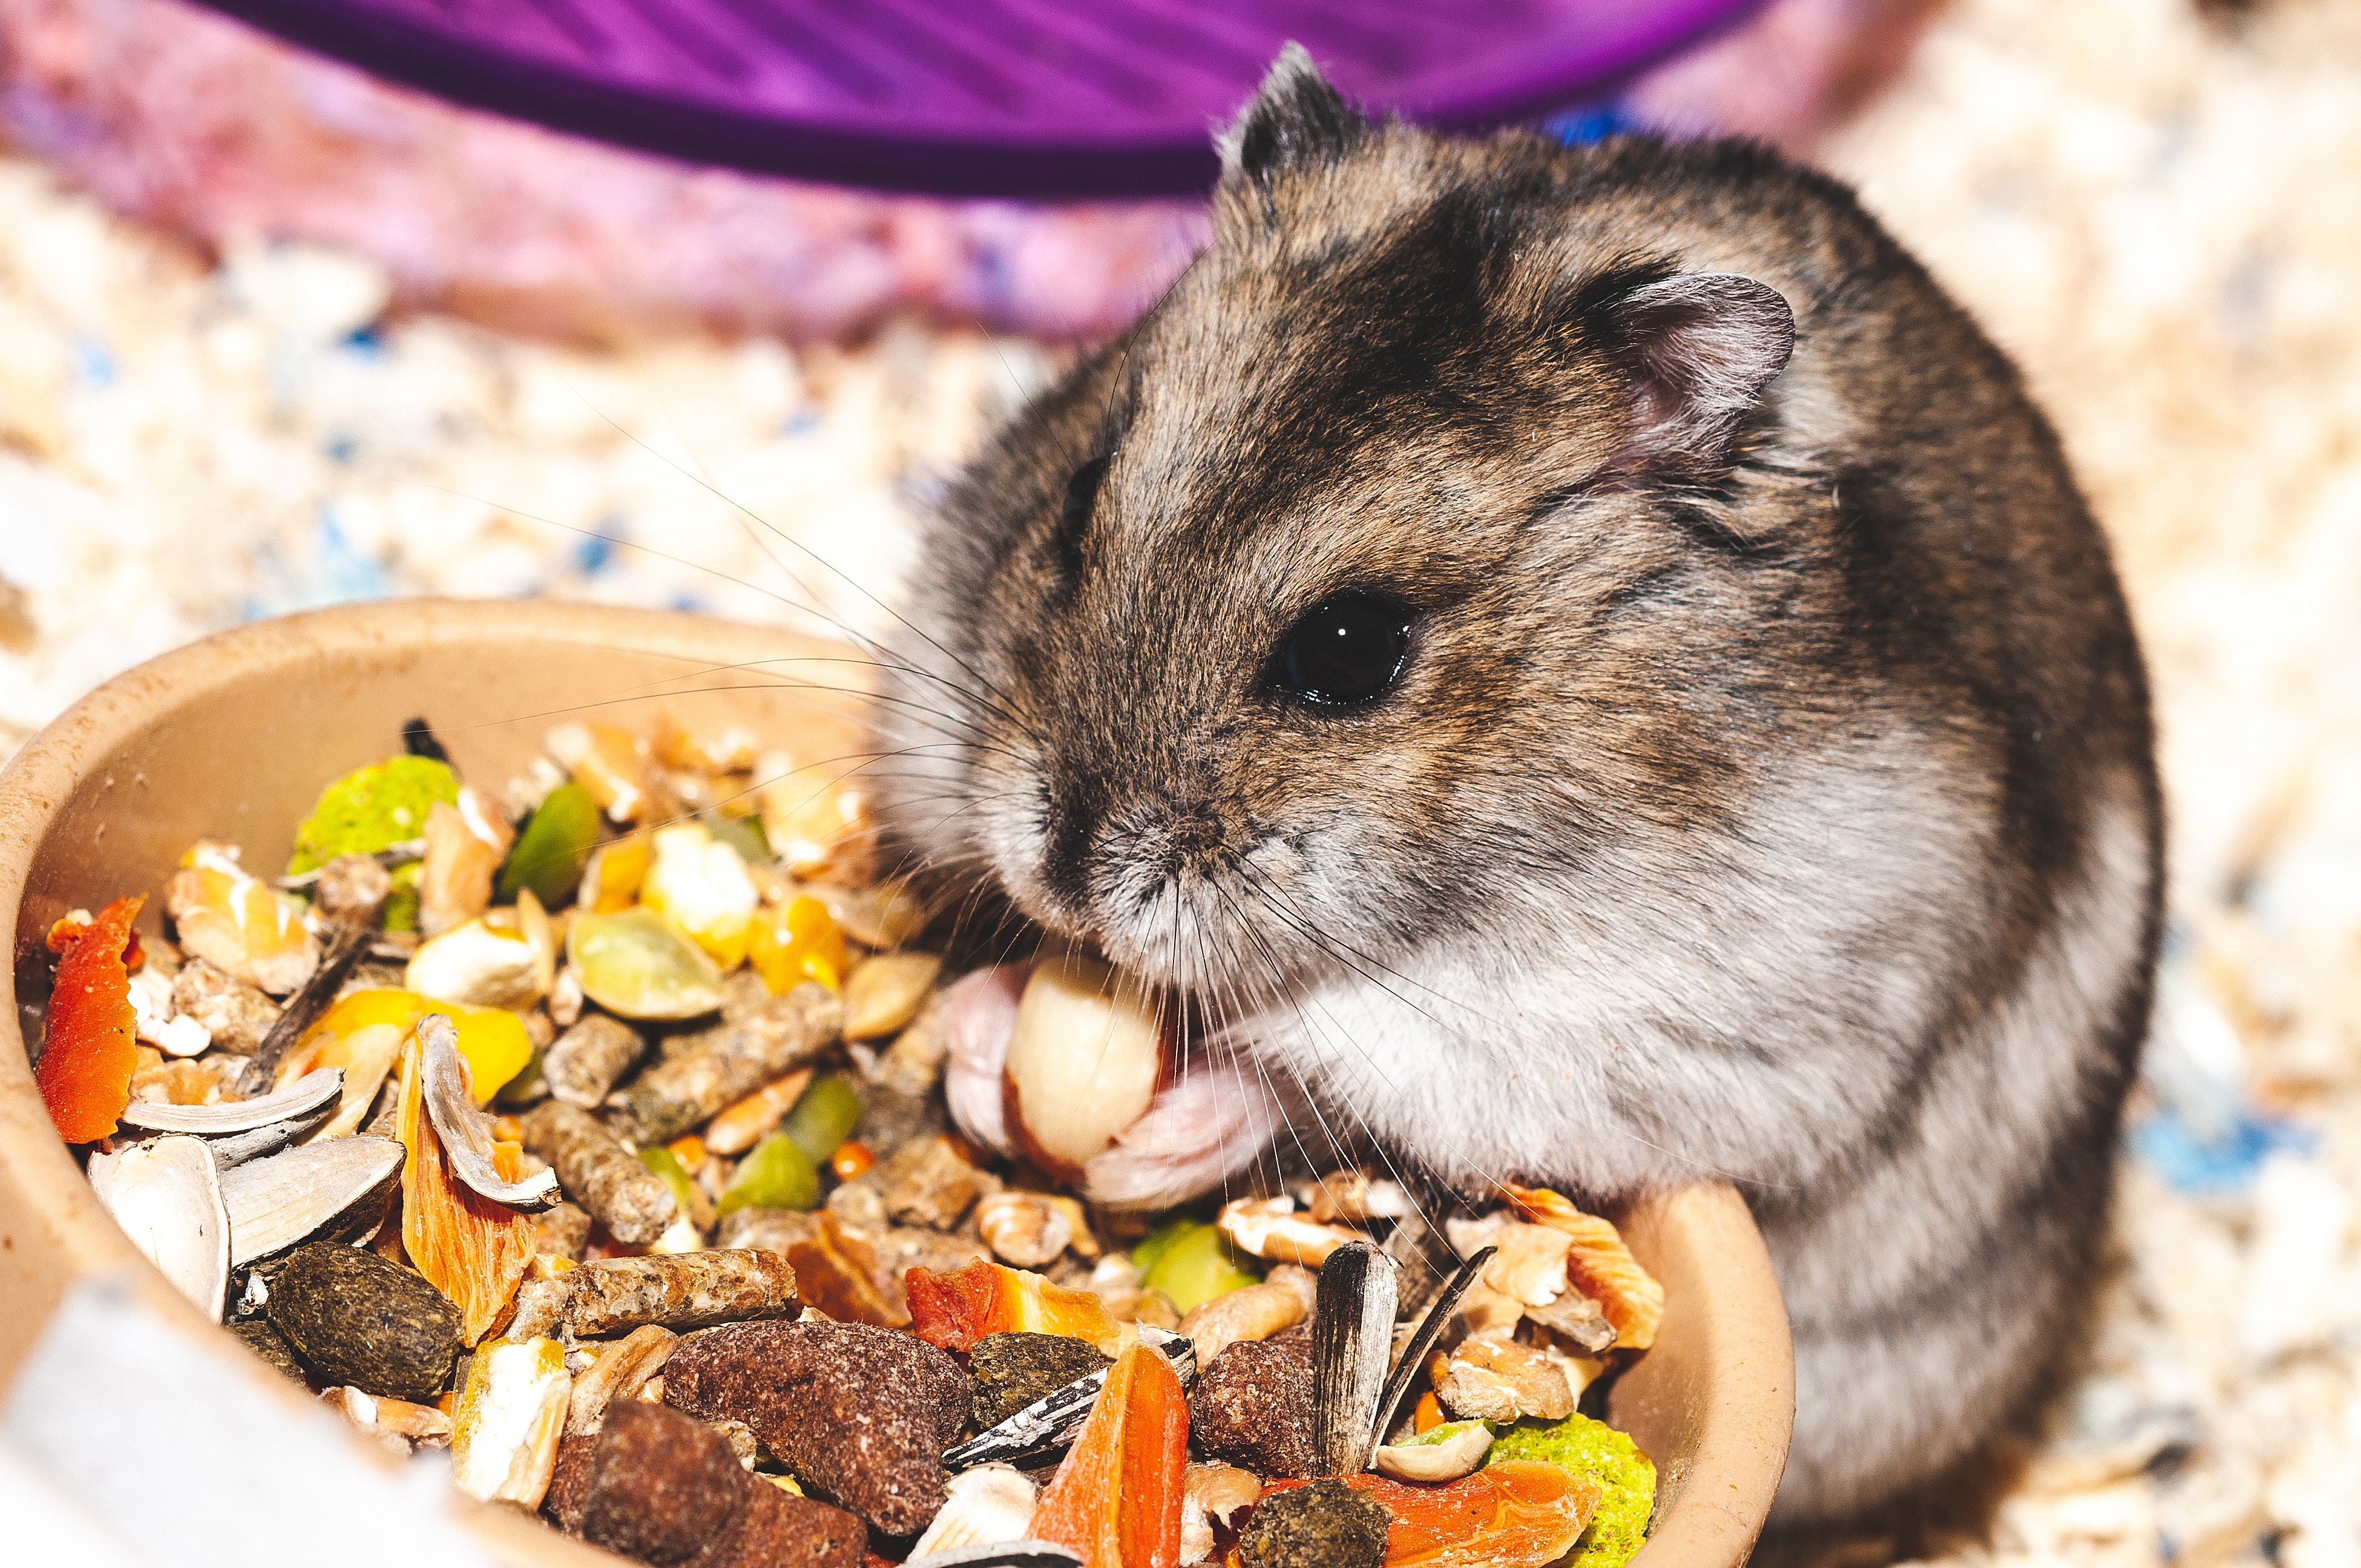 HD wallpaper rodent, funny, animals, nice, sweetheart, eat, hamster